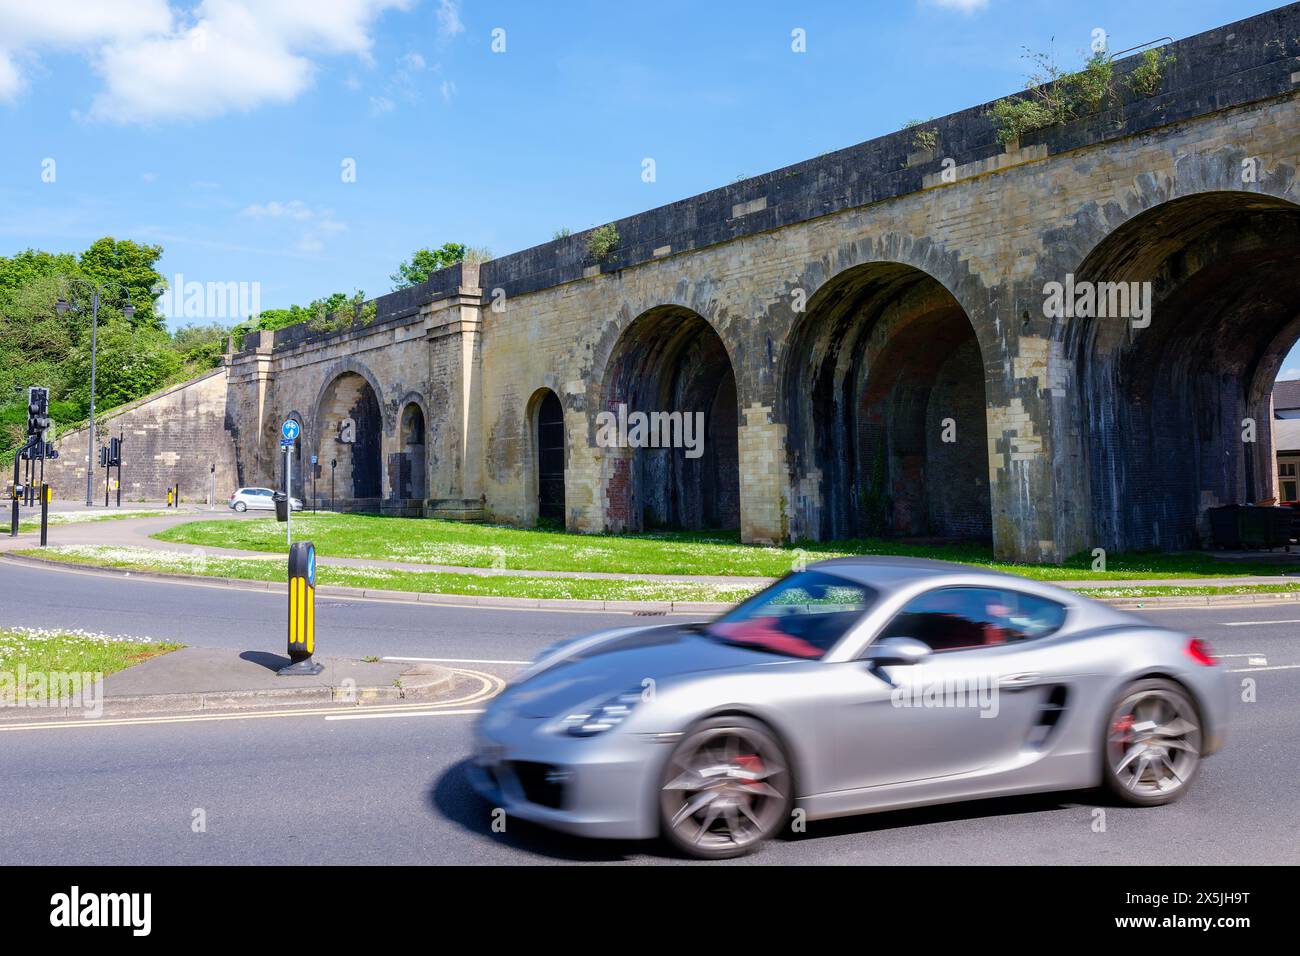 The Grade 2 listed Chippenham Railway Viaduct, designed by Isambard Kingdom Brunel in 1841 is located immediately west of Chippenham station. Stock Photo